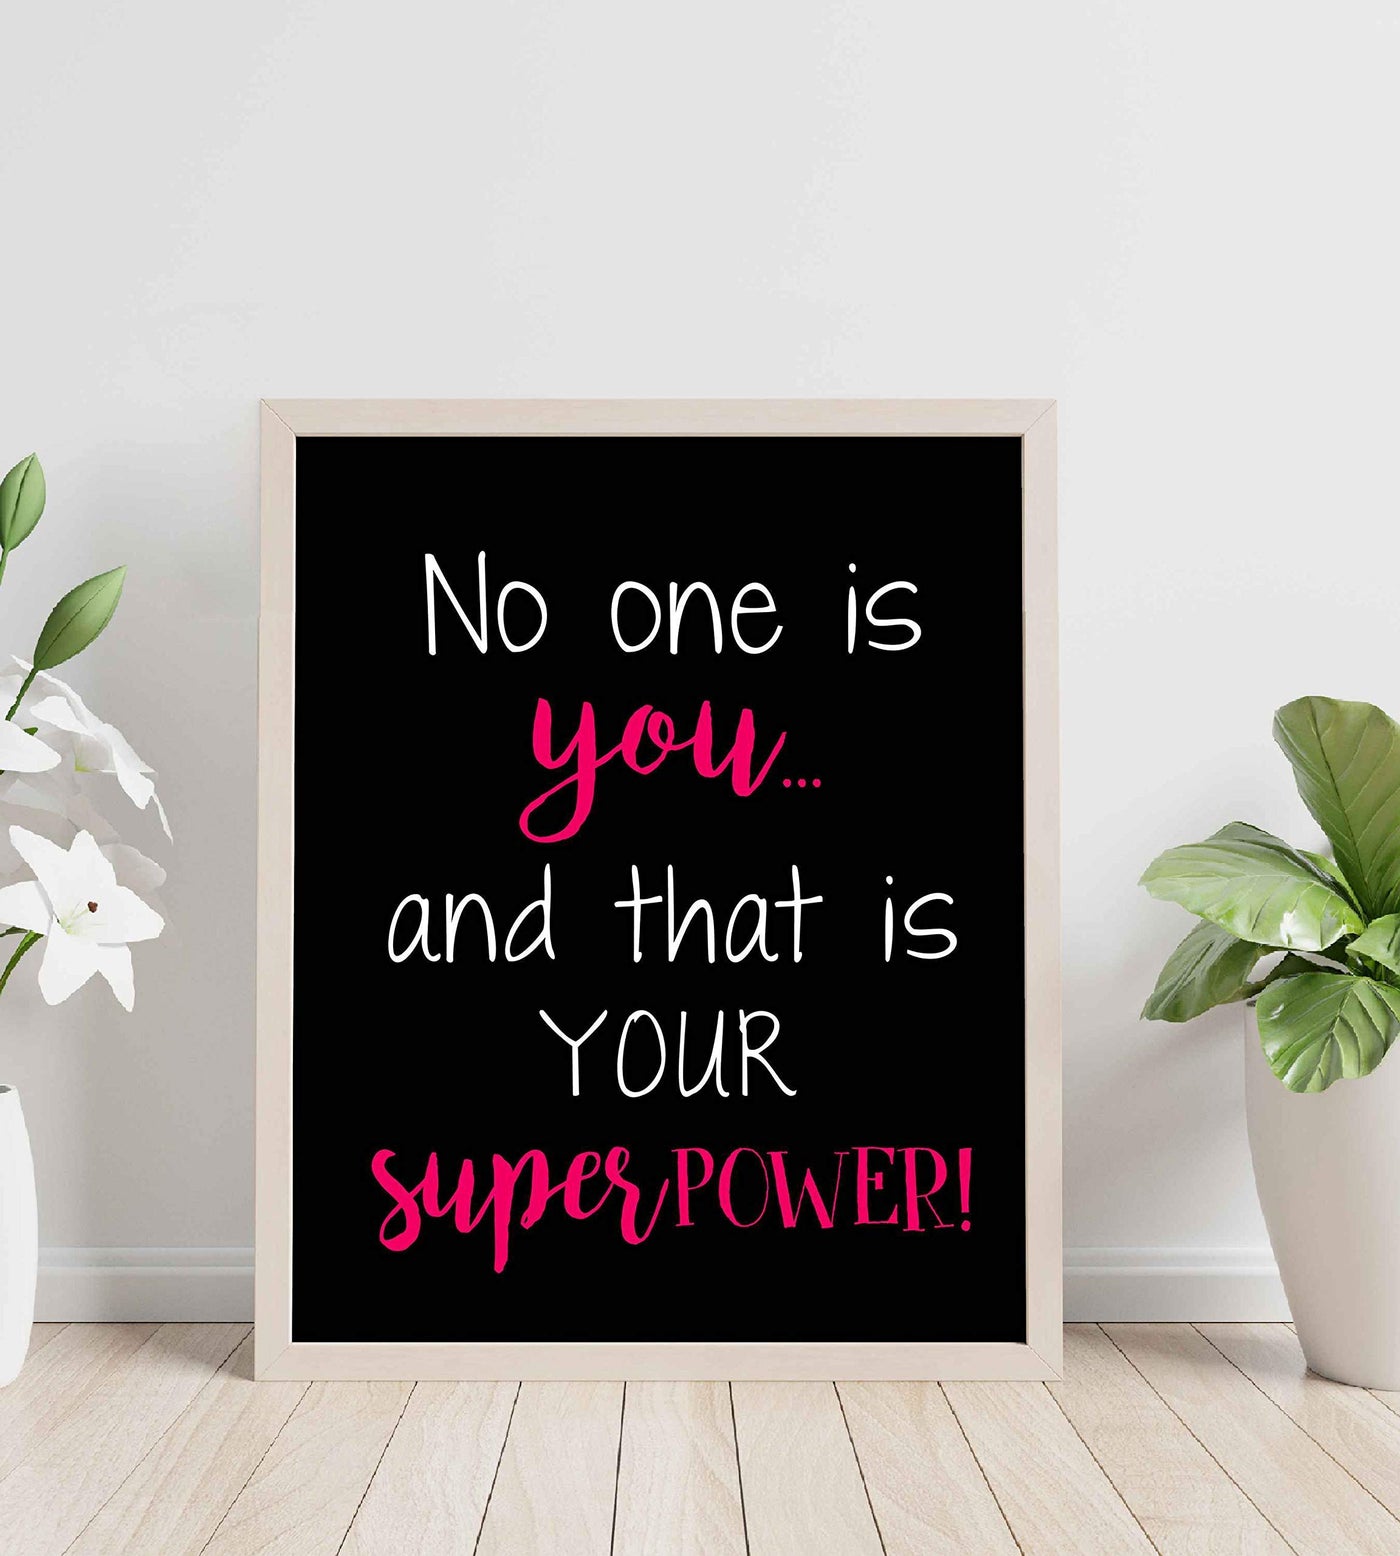 No One Is You-That Is Your Super Power Inspirational Quotes Wall Sign-8 x 10" Fierce Typographic Art Print-Ready to Frame. Ideal Home-Office-Dorm-School Decor. Great Motivational Gift!